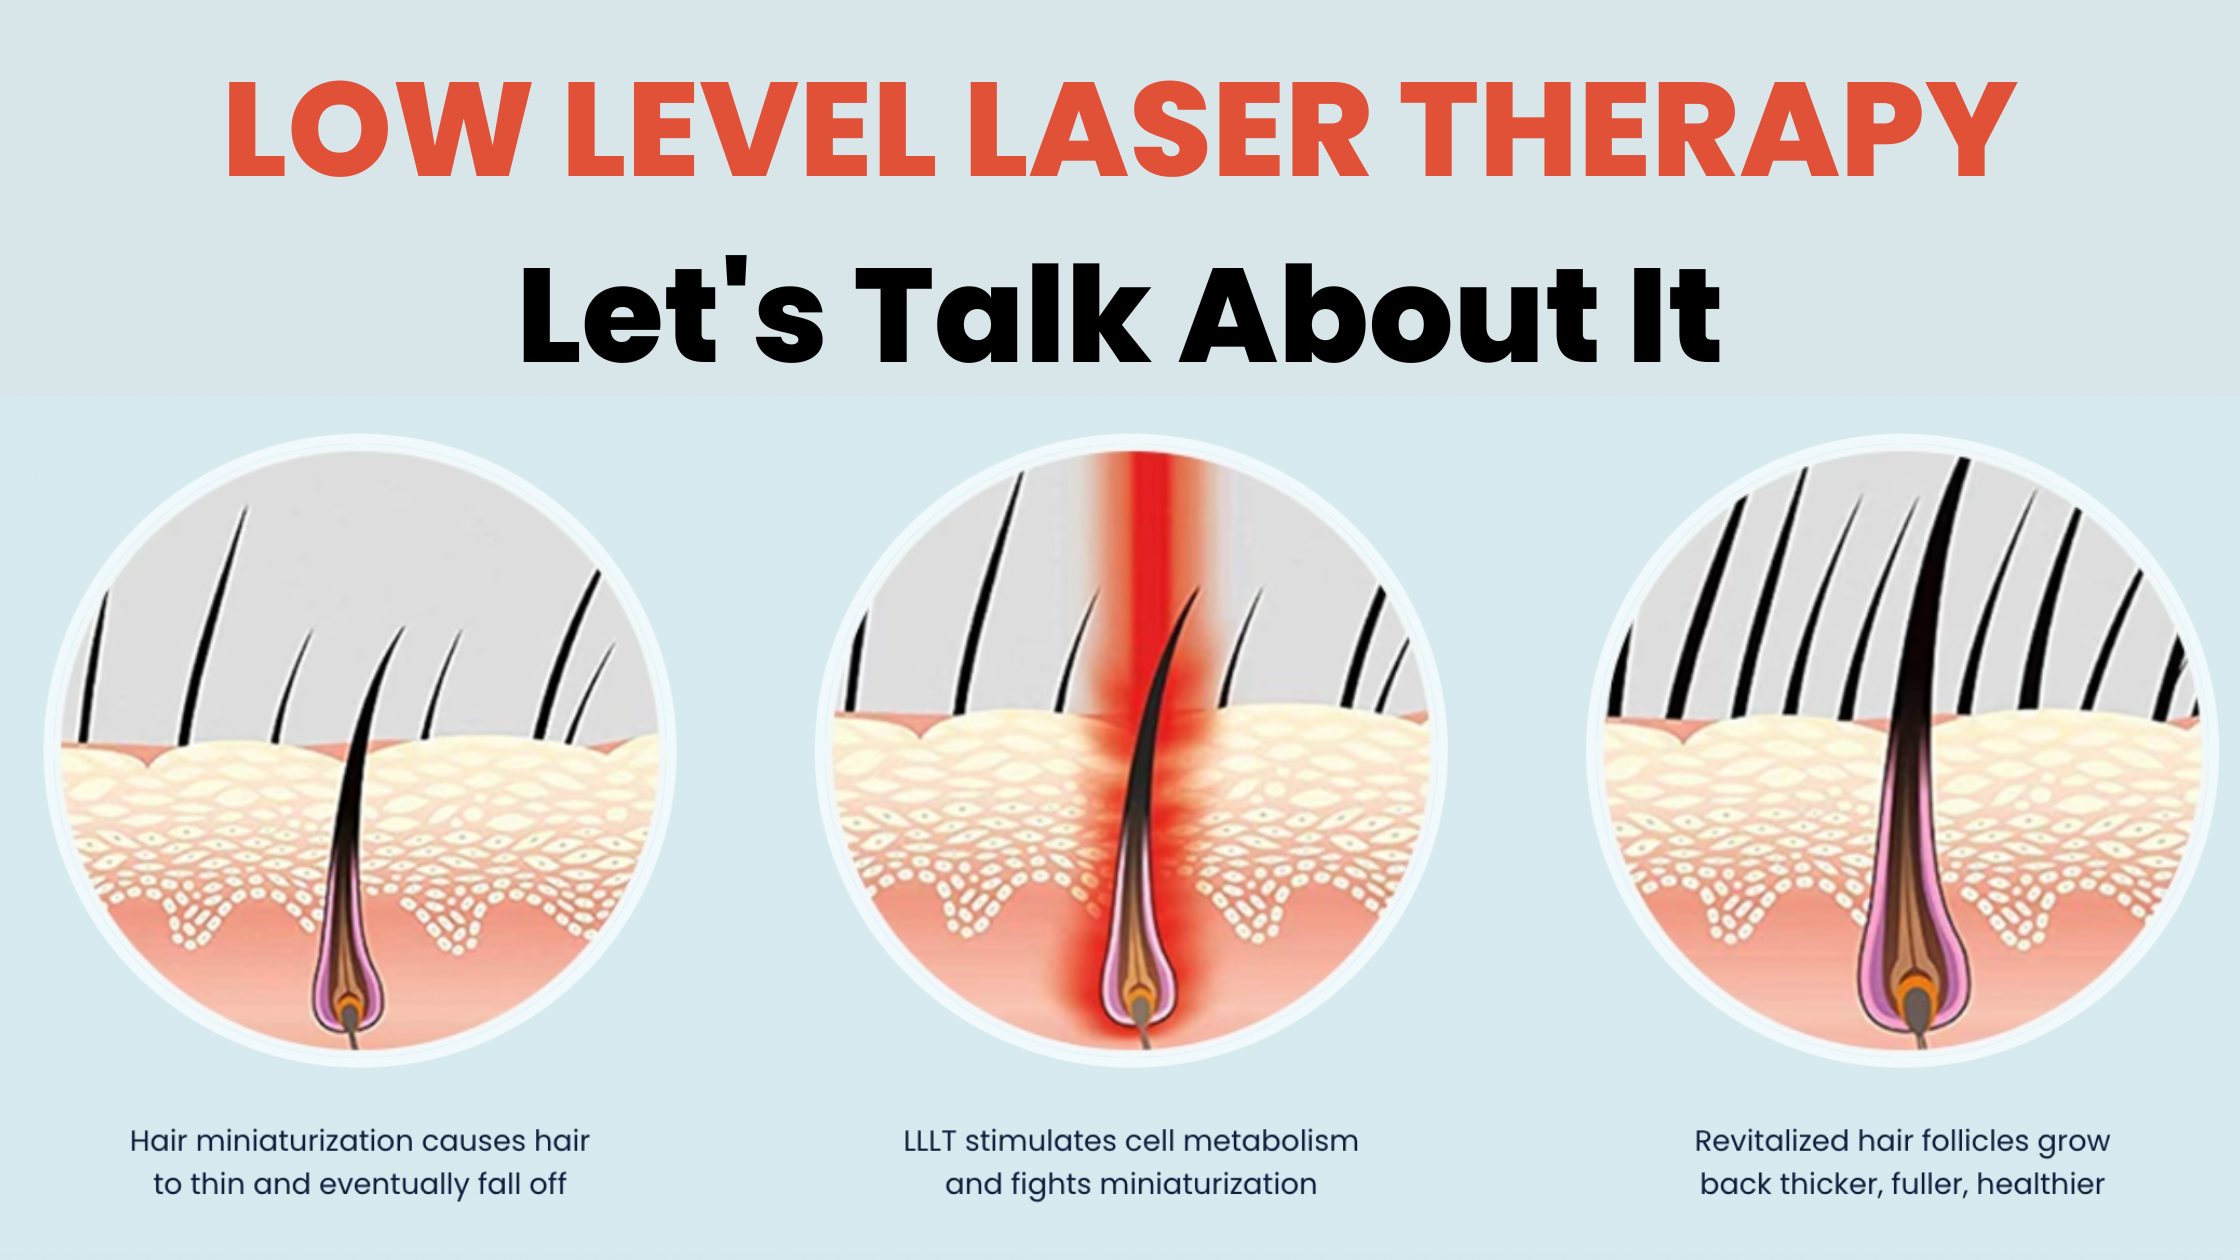 Low Level Laser Therapy - The Complete Solution for Hair Loss and Balding - MyHairSmart